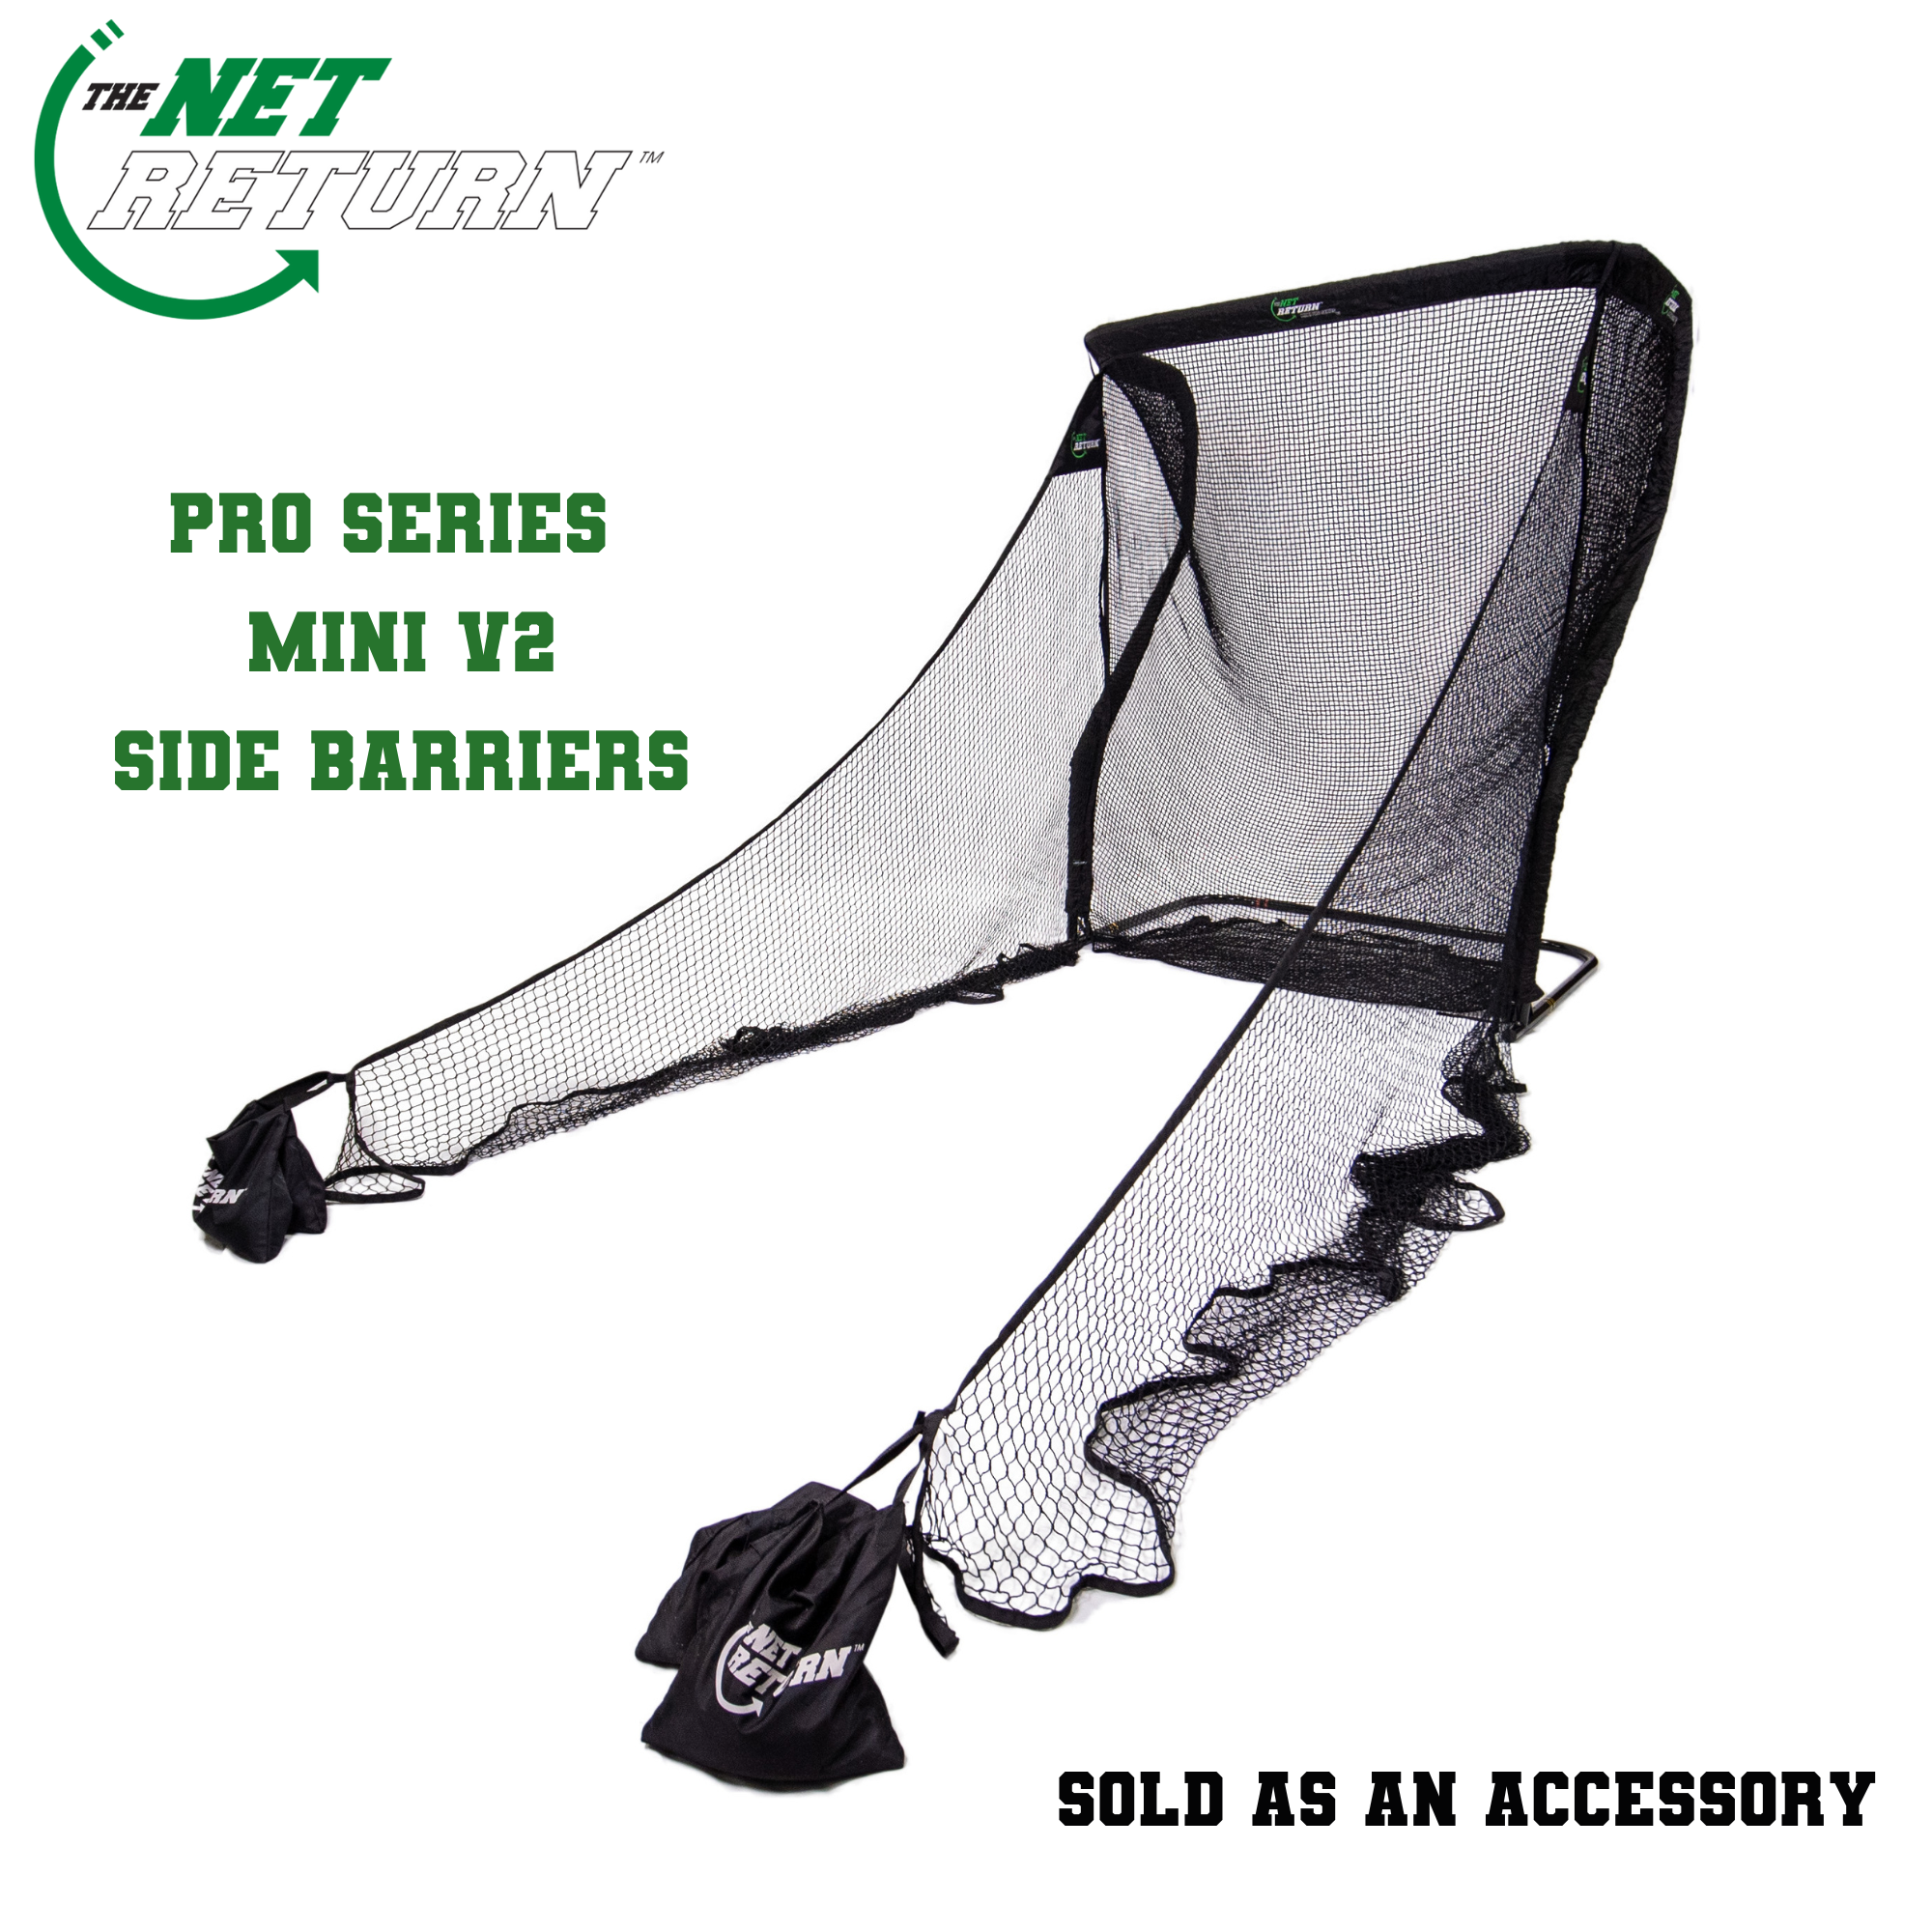 Mini Pro Series V2 - Side Barriers - Pair (4 Sandbags Included)